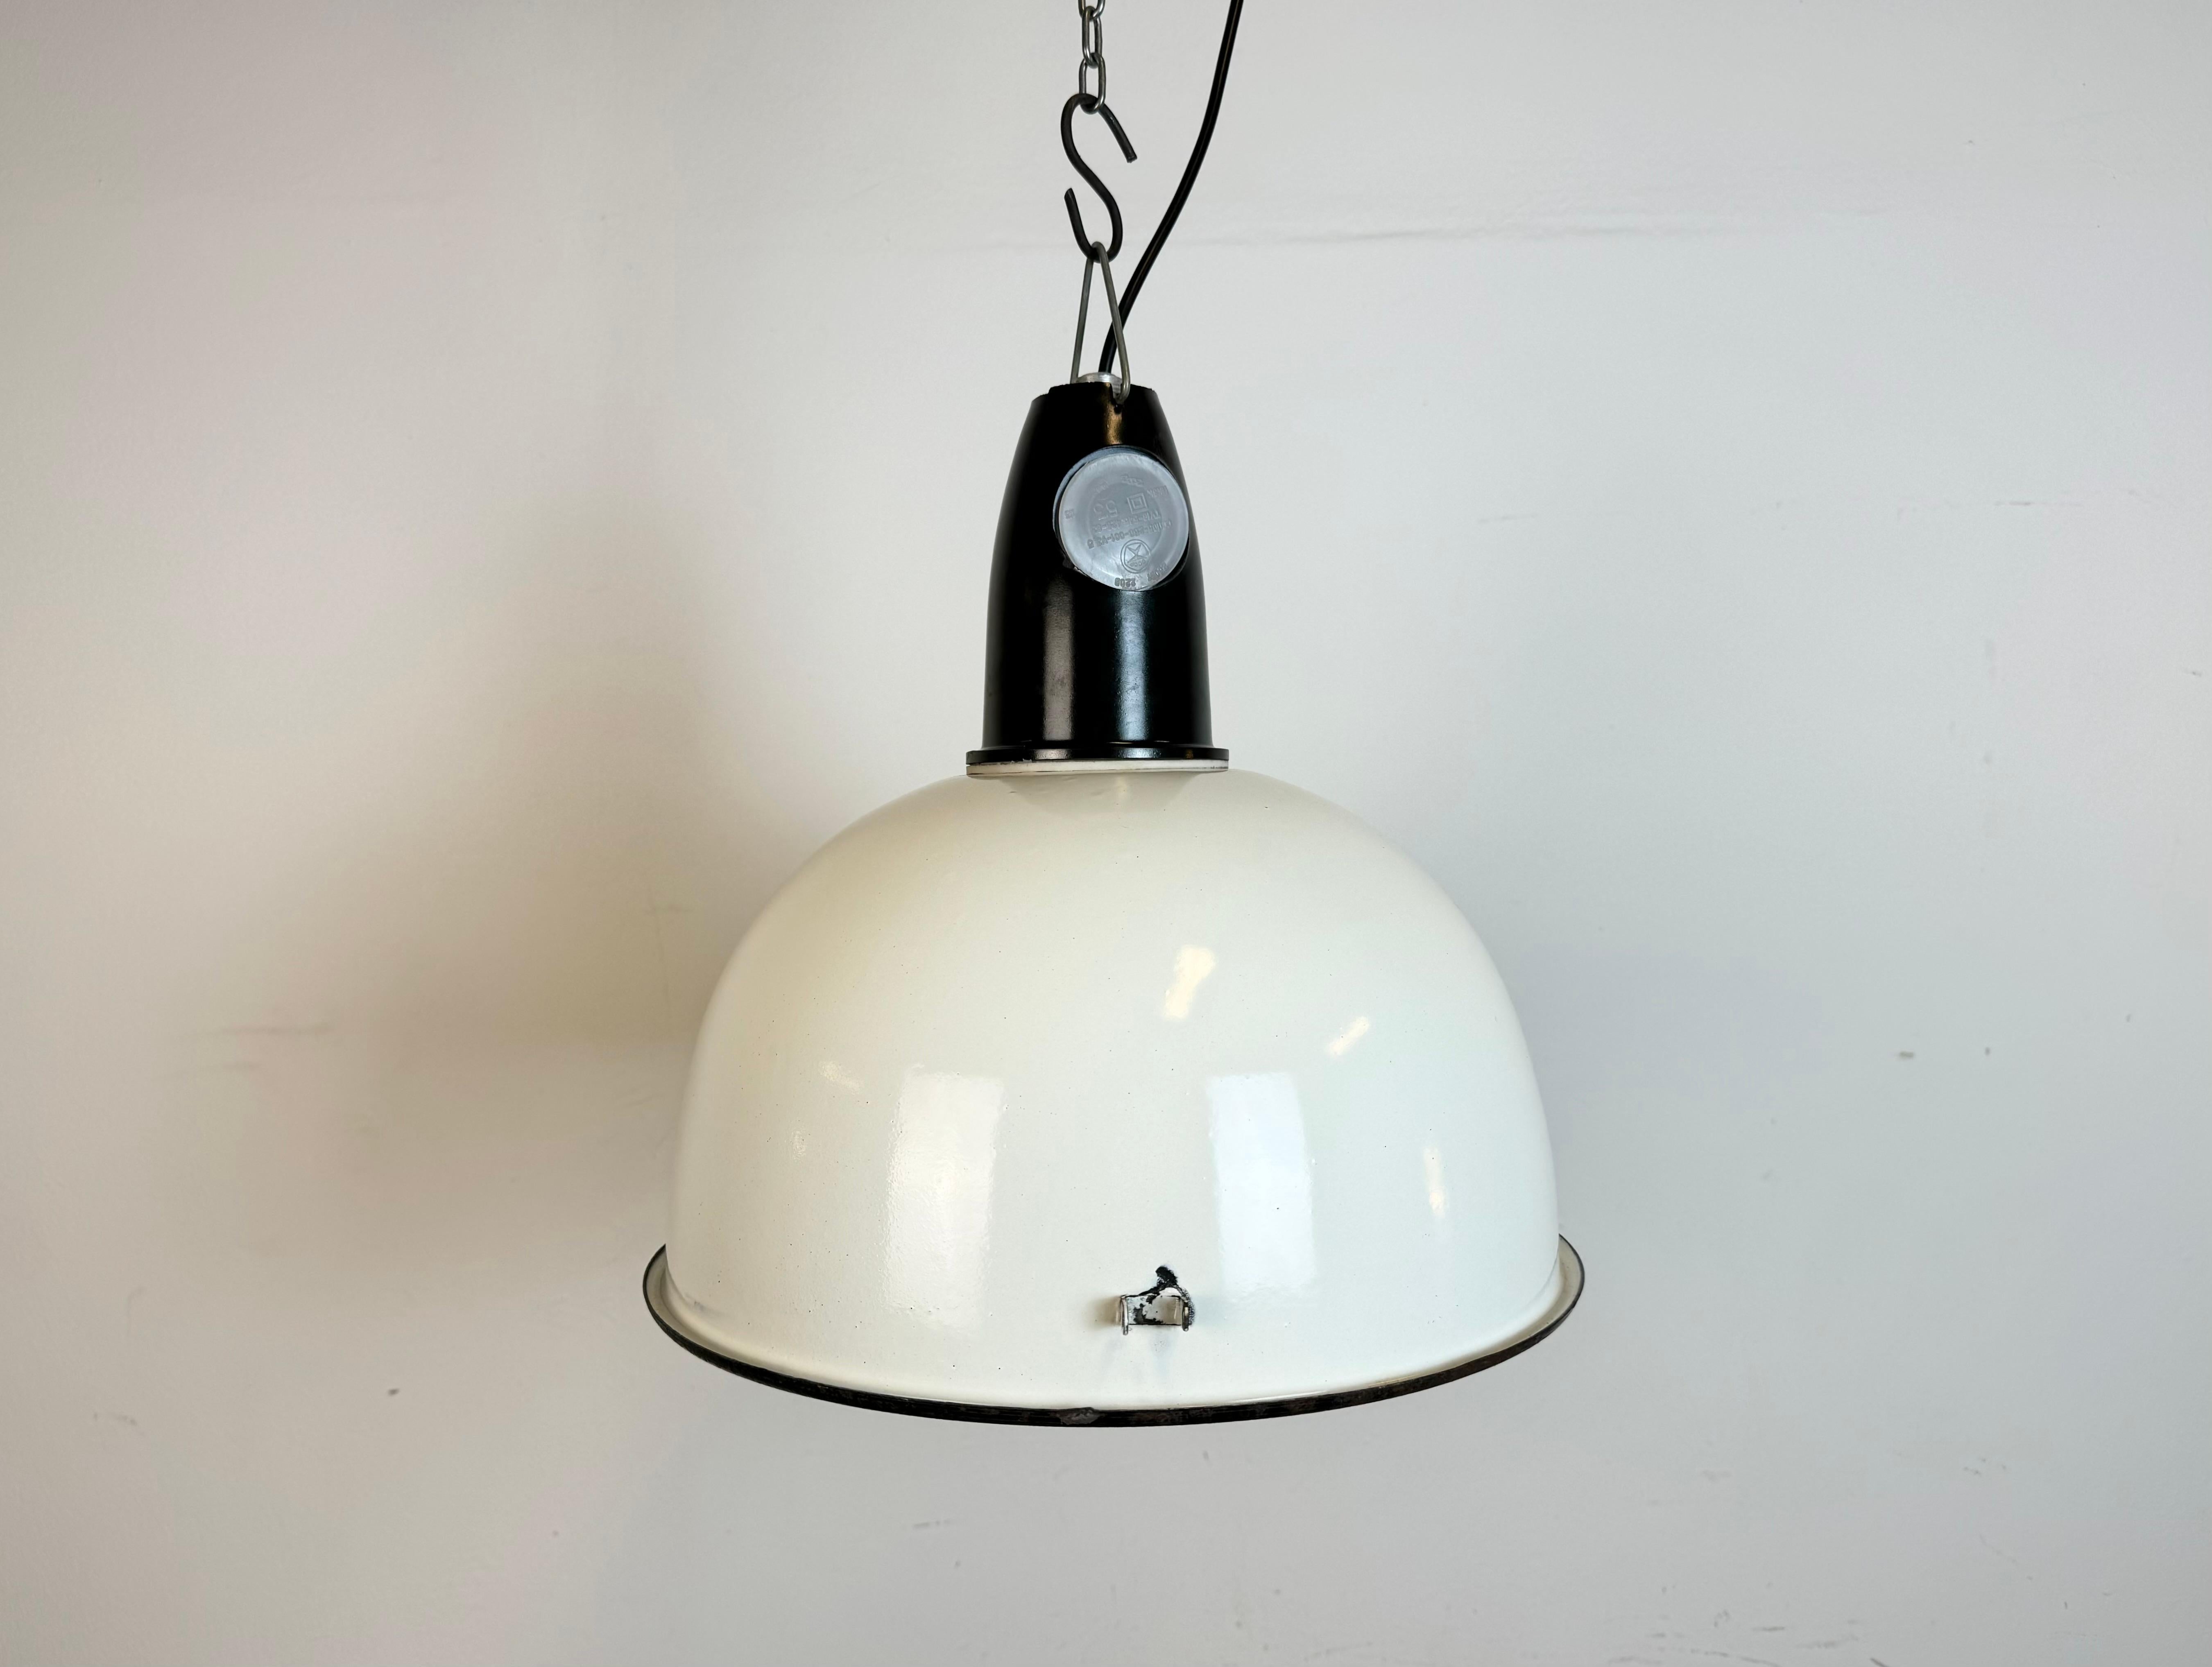 - Vintage Industrial factory light from the 1960s 
- Made in Ukraine in former Soviet Union
- White enamel shade
- Bakelite top 
- Socket requires standard E27/ E26 lightbulbs 
- New wire 
- Lampshade diameter: 34 cm
- Weight : 2 kg.